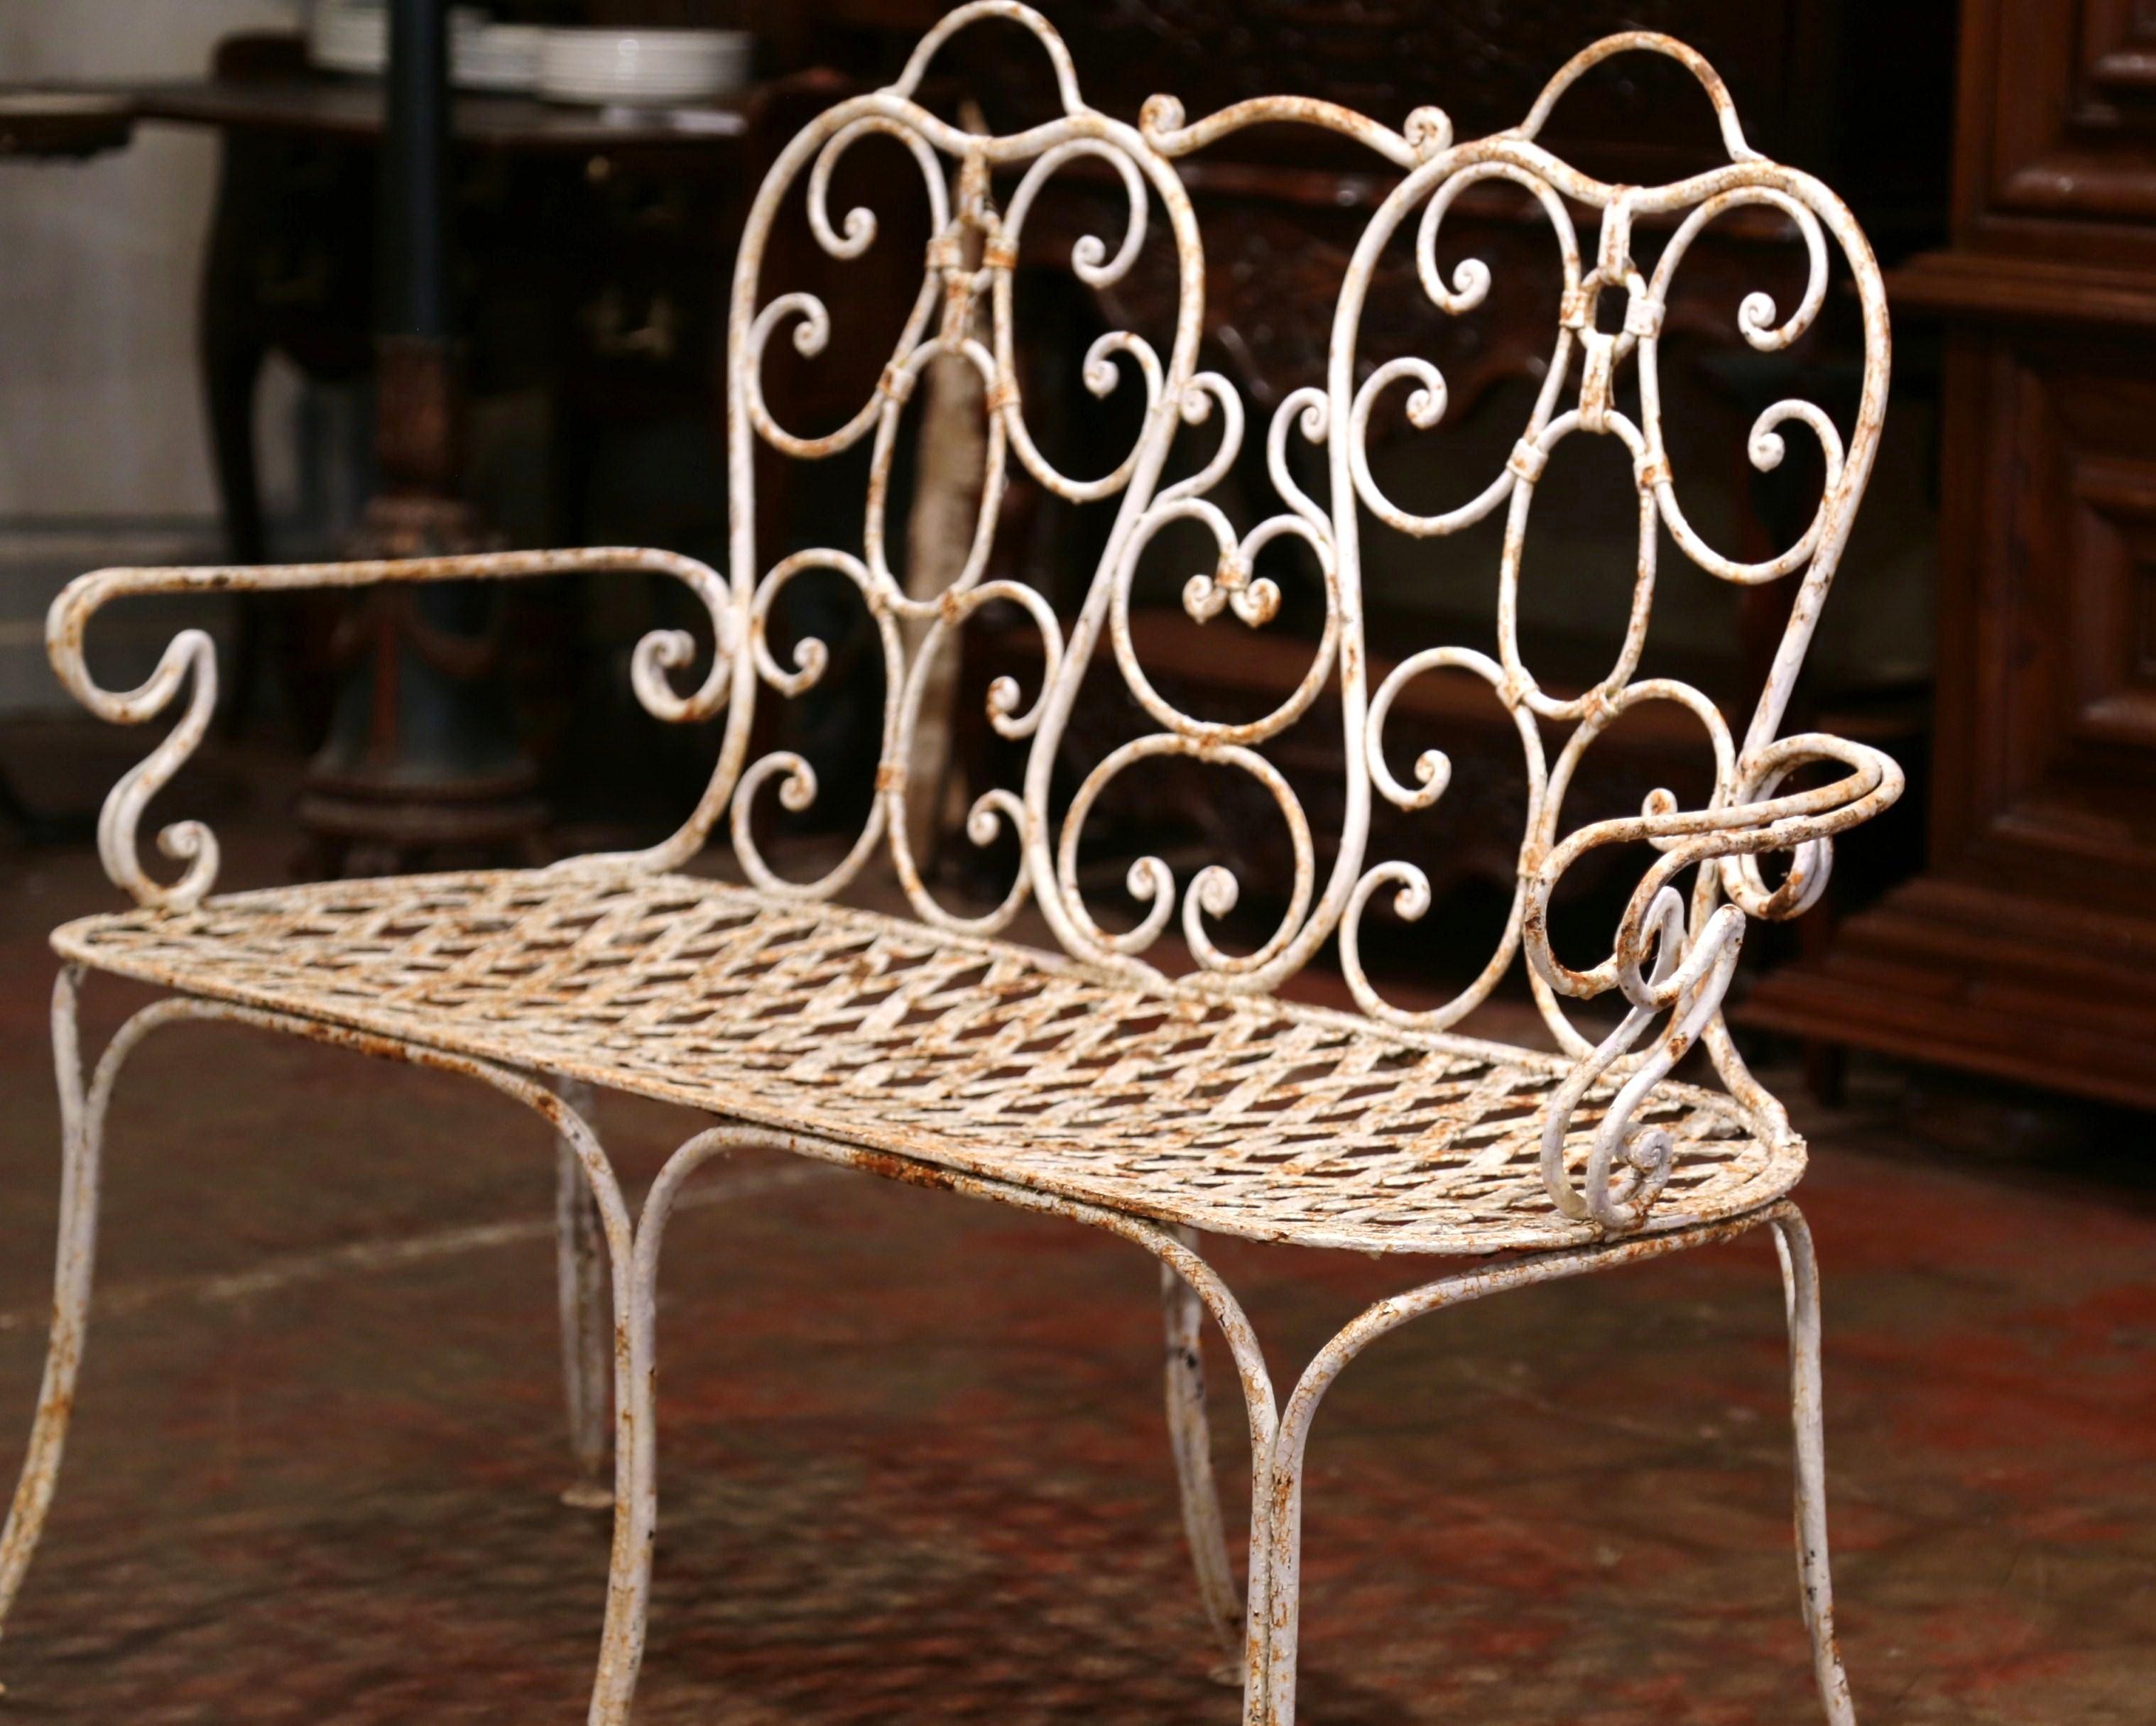 Add extra seating to an outdoor space, porch or patio with this elegant antique iron bench. Crafted in northern France circa 1880, the scrolling bench sits on six thin, curved legs. The delicate garden bench has gracious lines and a beautifully